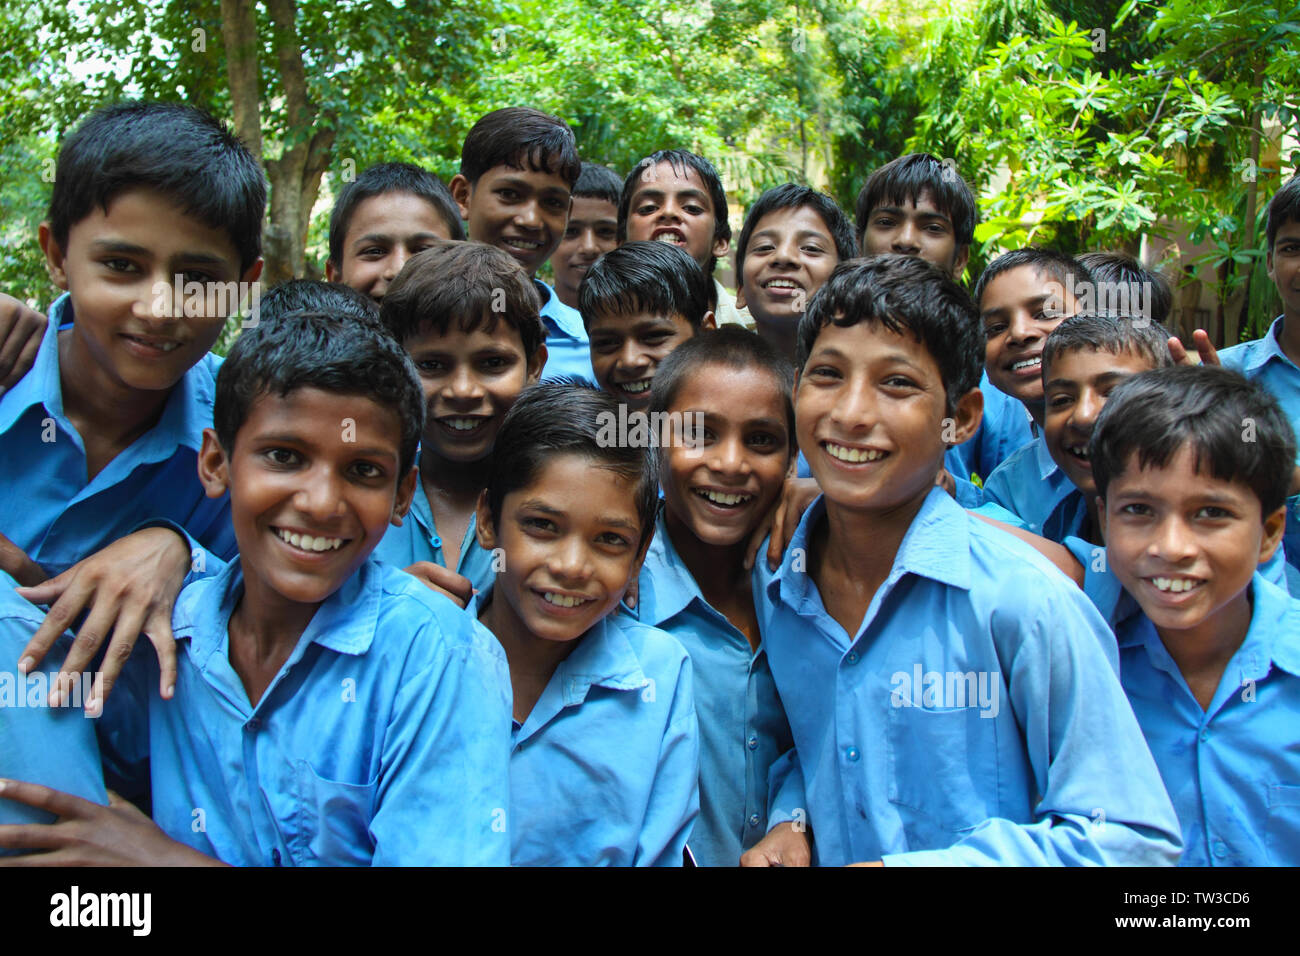 Group of school students smiling Stock Photo